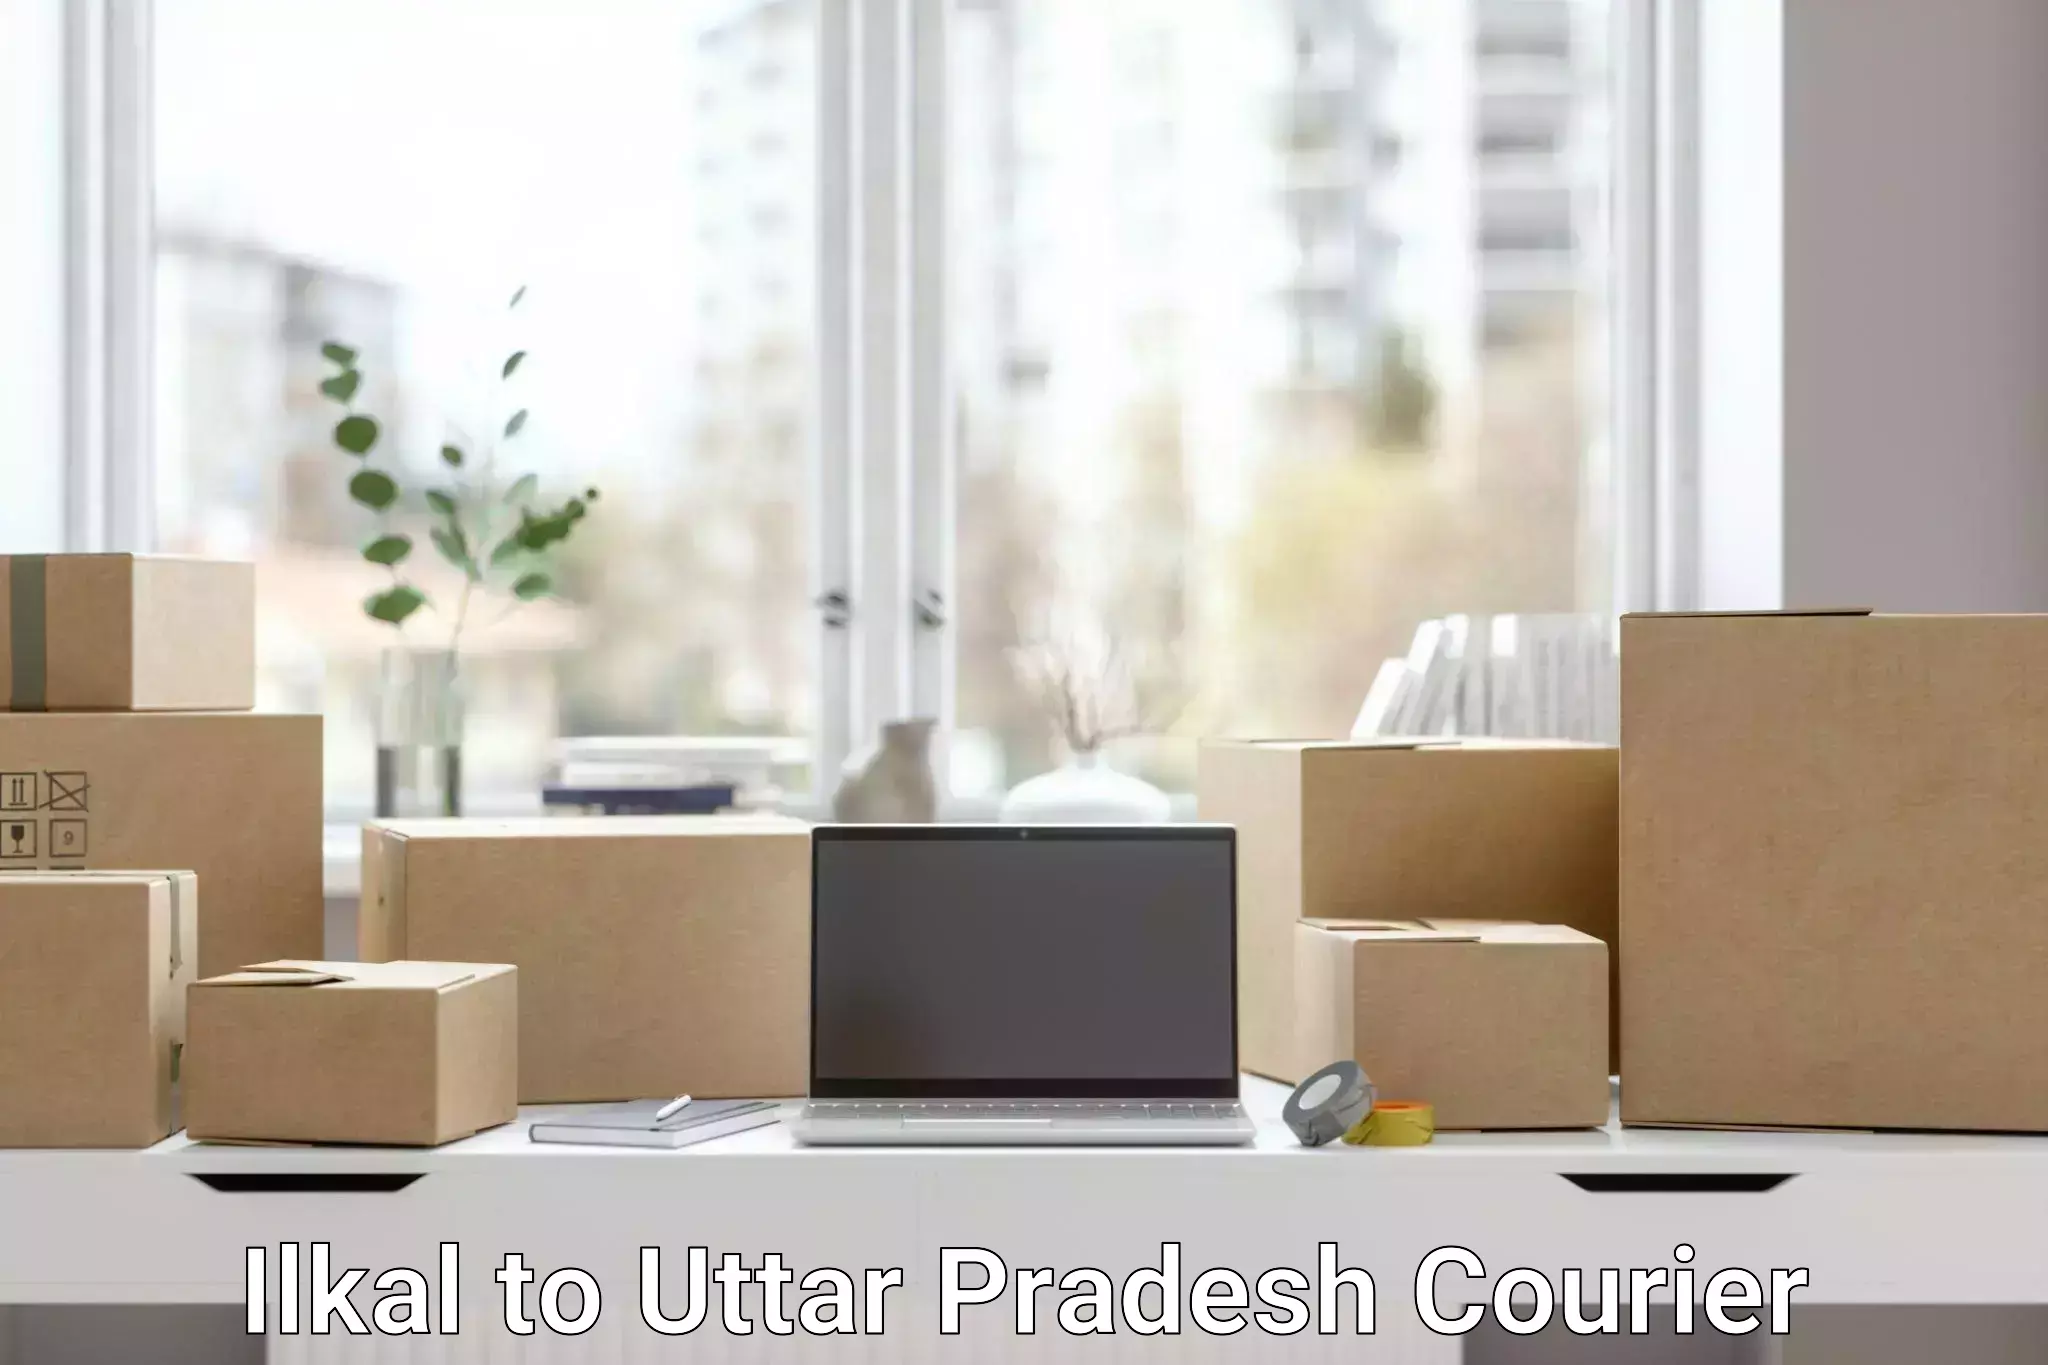 24-hour courier services Ilkal to Aligarh Muslim University